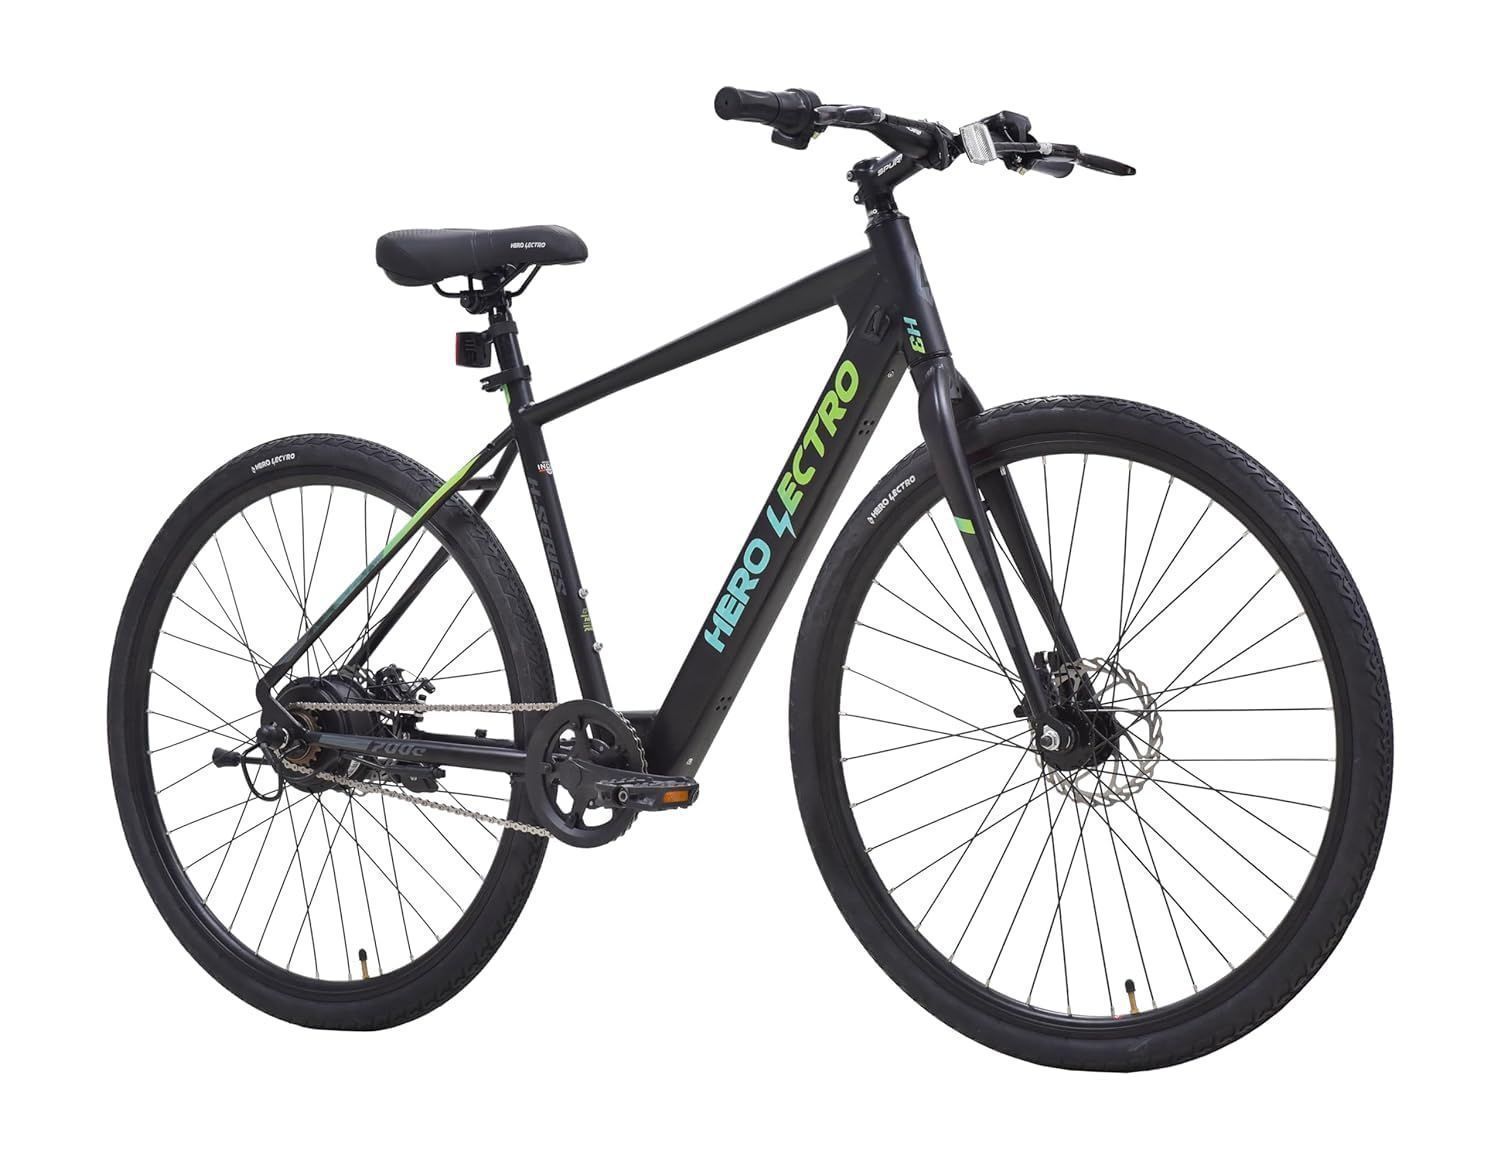 Hero Lectro H3 700C Single Speed Electric Cycle | 250W BLDC Motor | 36V/2A (Li-ion) 5.8Ah Battery | Speed Upto 25 Kmph | Range Upto 30 KM/Charge - 98% Assembled cycle